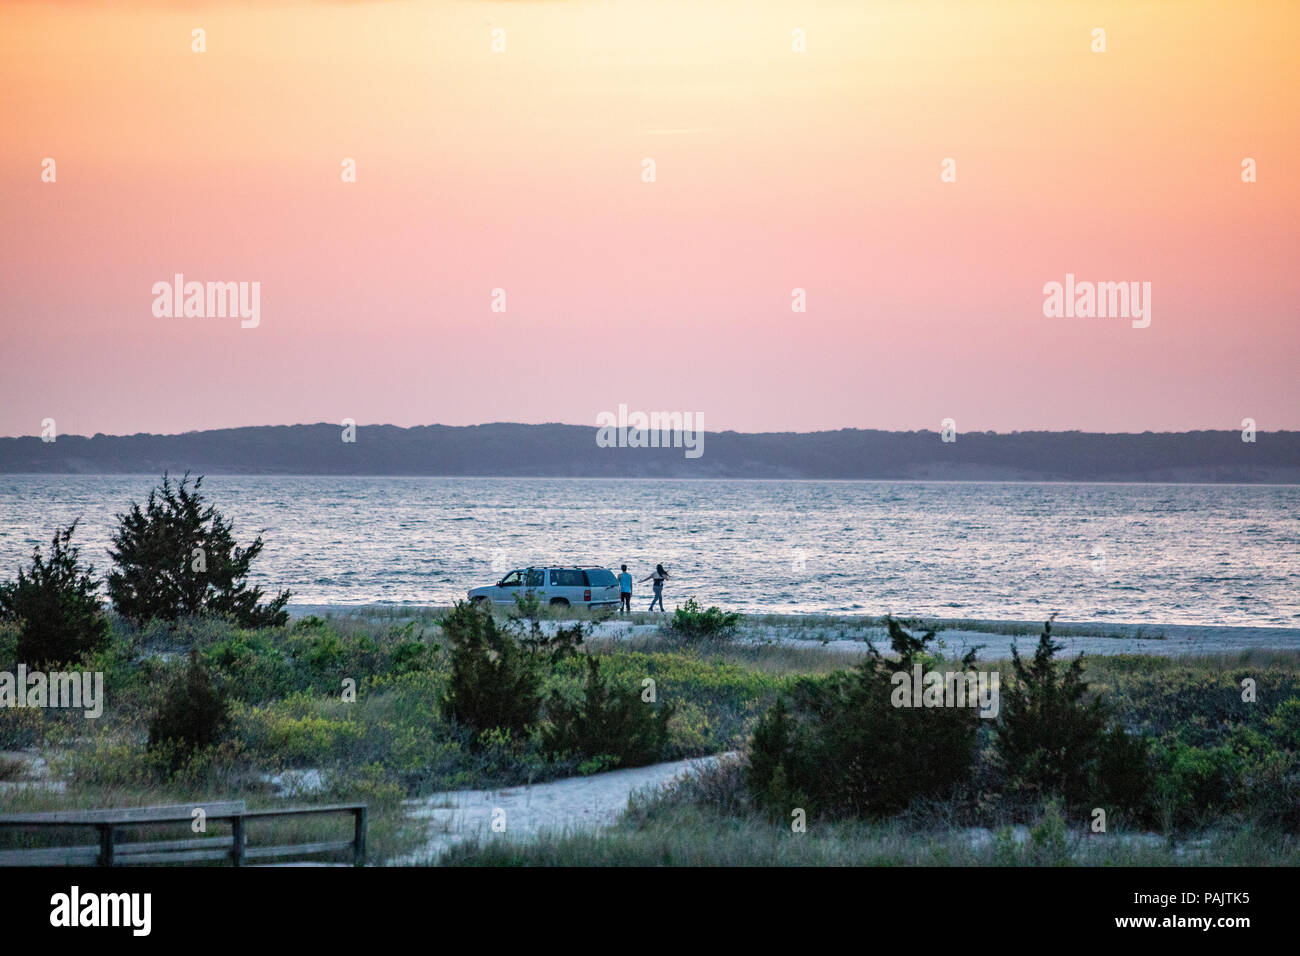 two people and a white four wheel drive truck on a beach at sunset Stock Photo